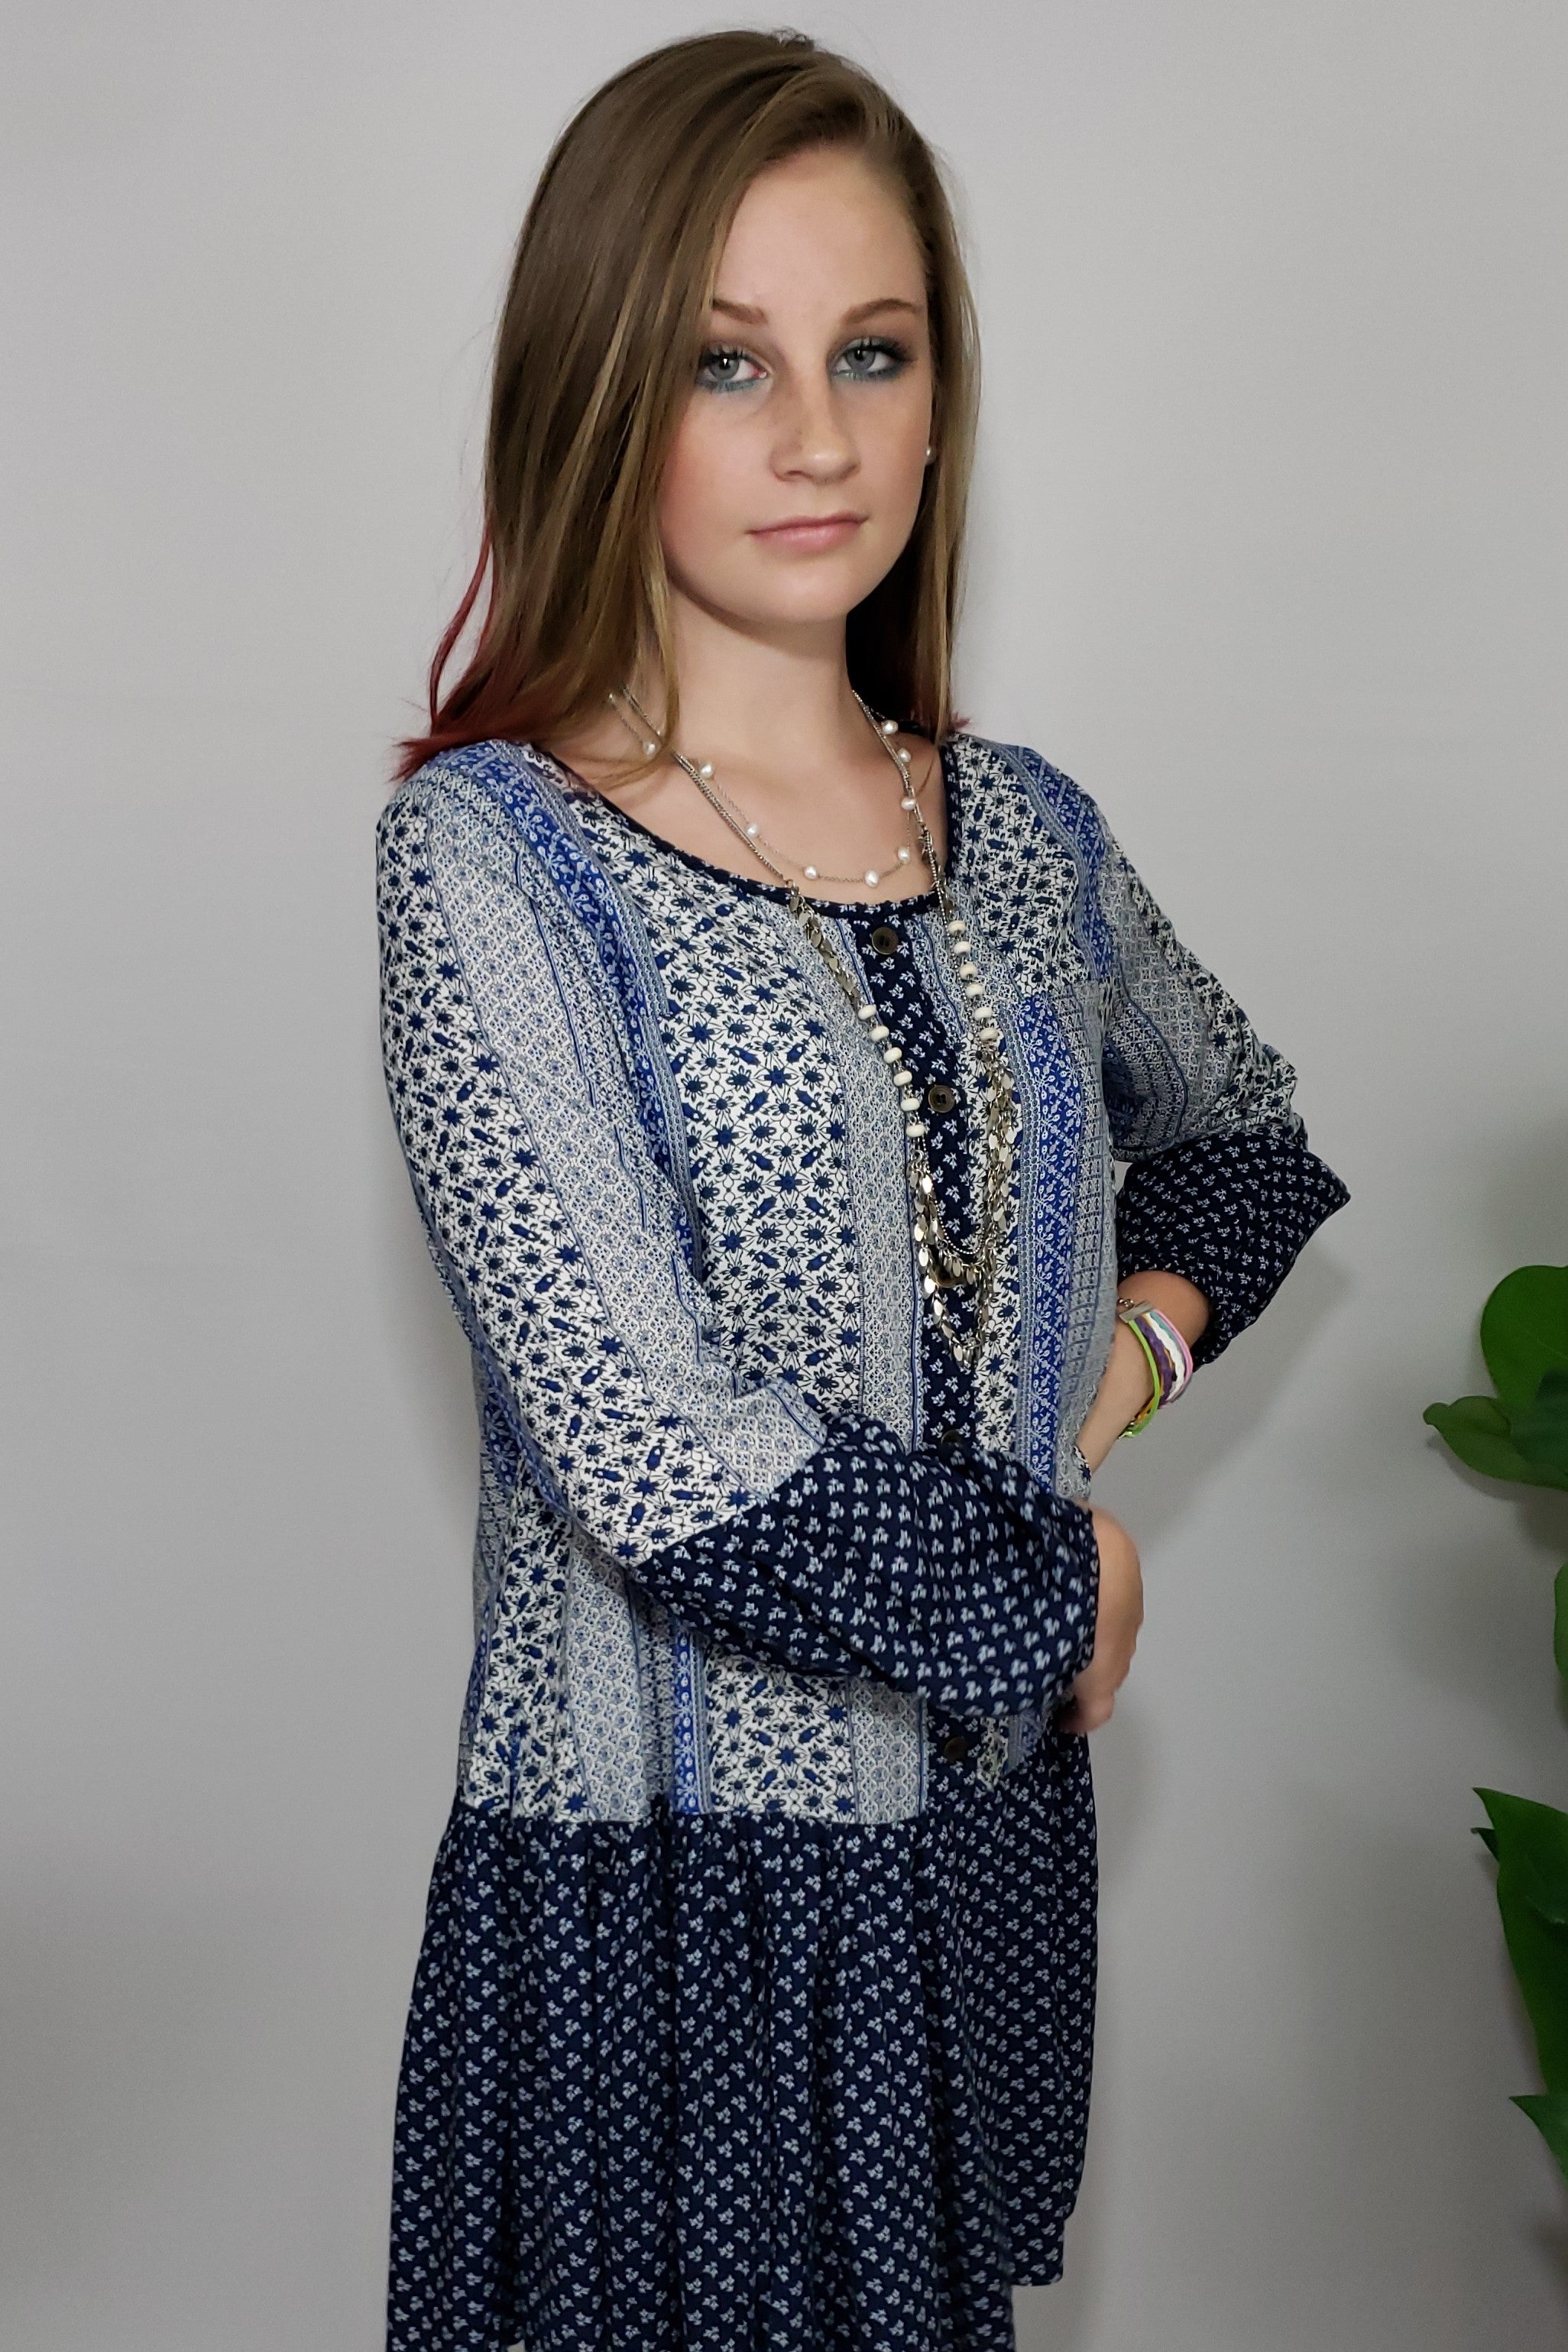 Mally Shades of Blooz Ruffle Button Down Contrast Tunic Dress - Houzz of DVA Boutique